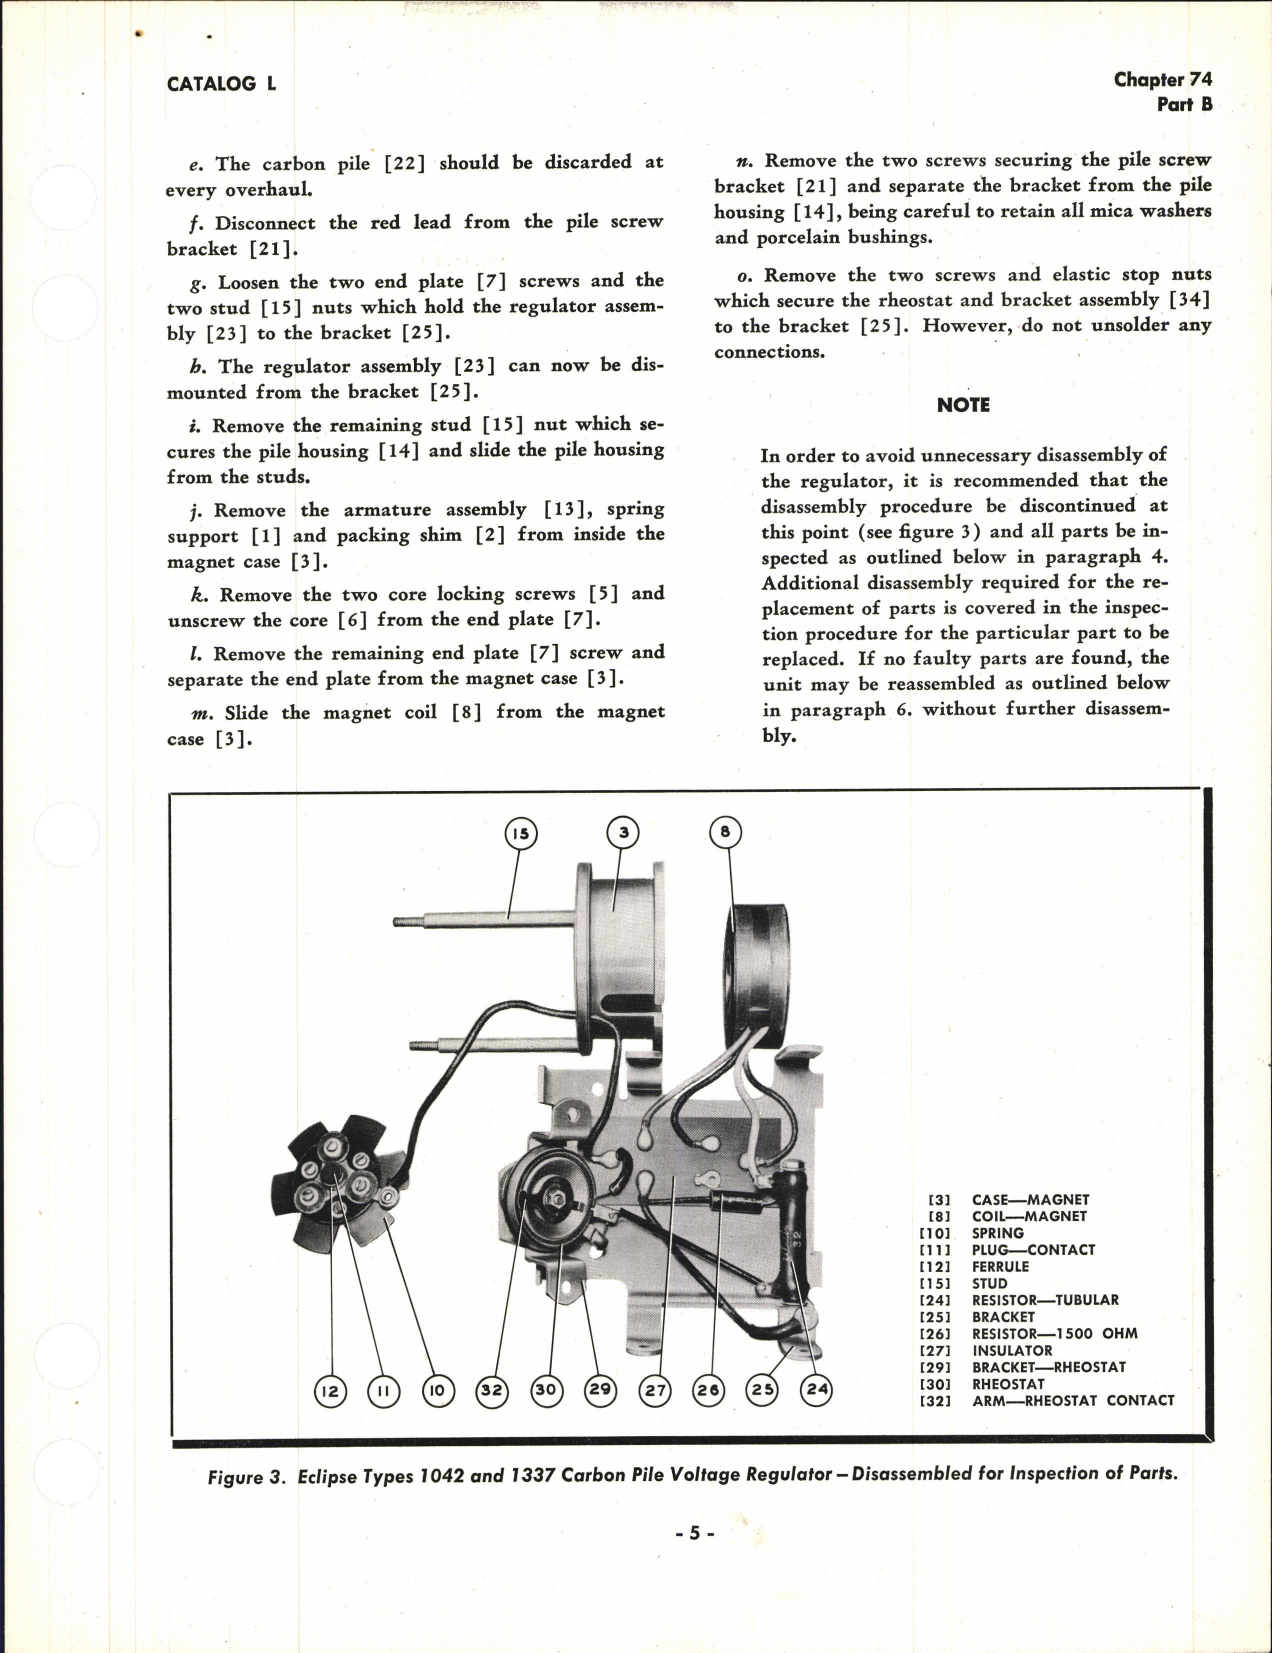 Sample page 5 from AirCorps Library document: Overhaul Instructions for Carbon Pile Voltage Regulator Types 1042 and 1337